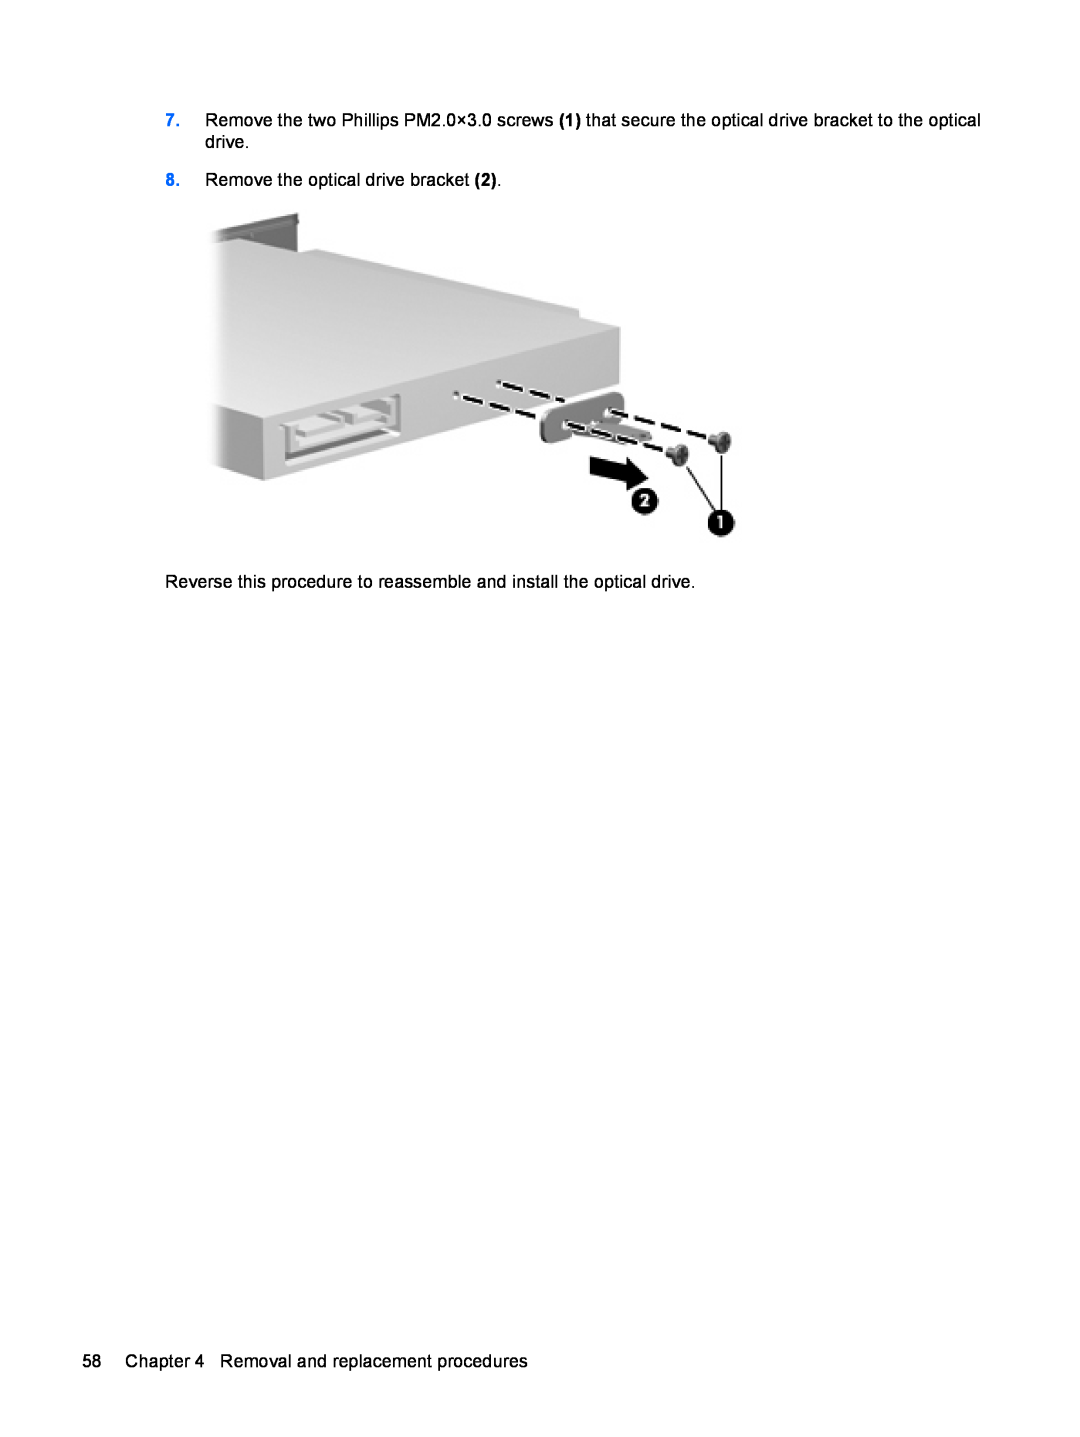 HP DV6 manual Remove the optical drive bracket, Reverse this procedure to reassemble and install the optical drive 